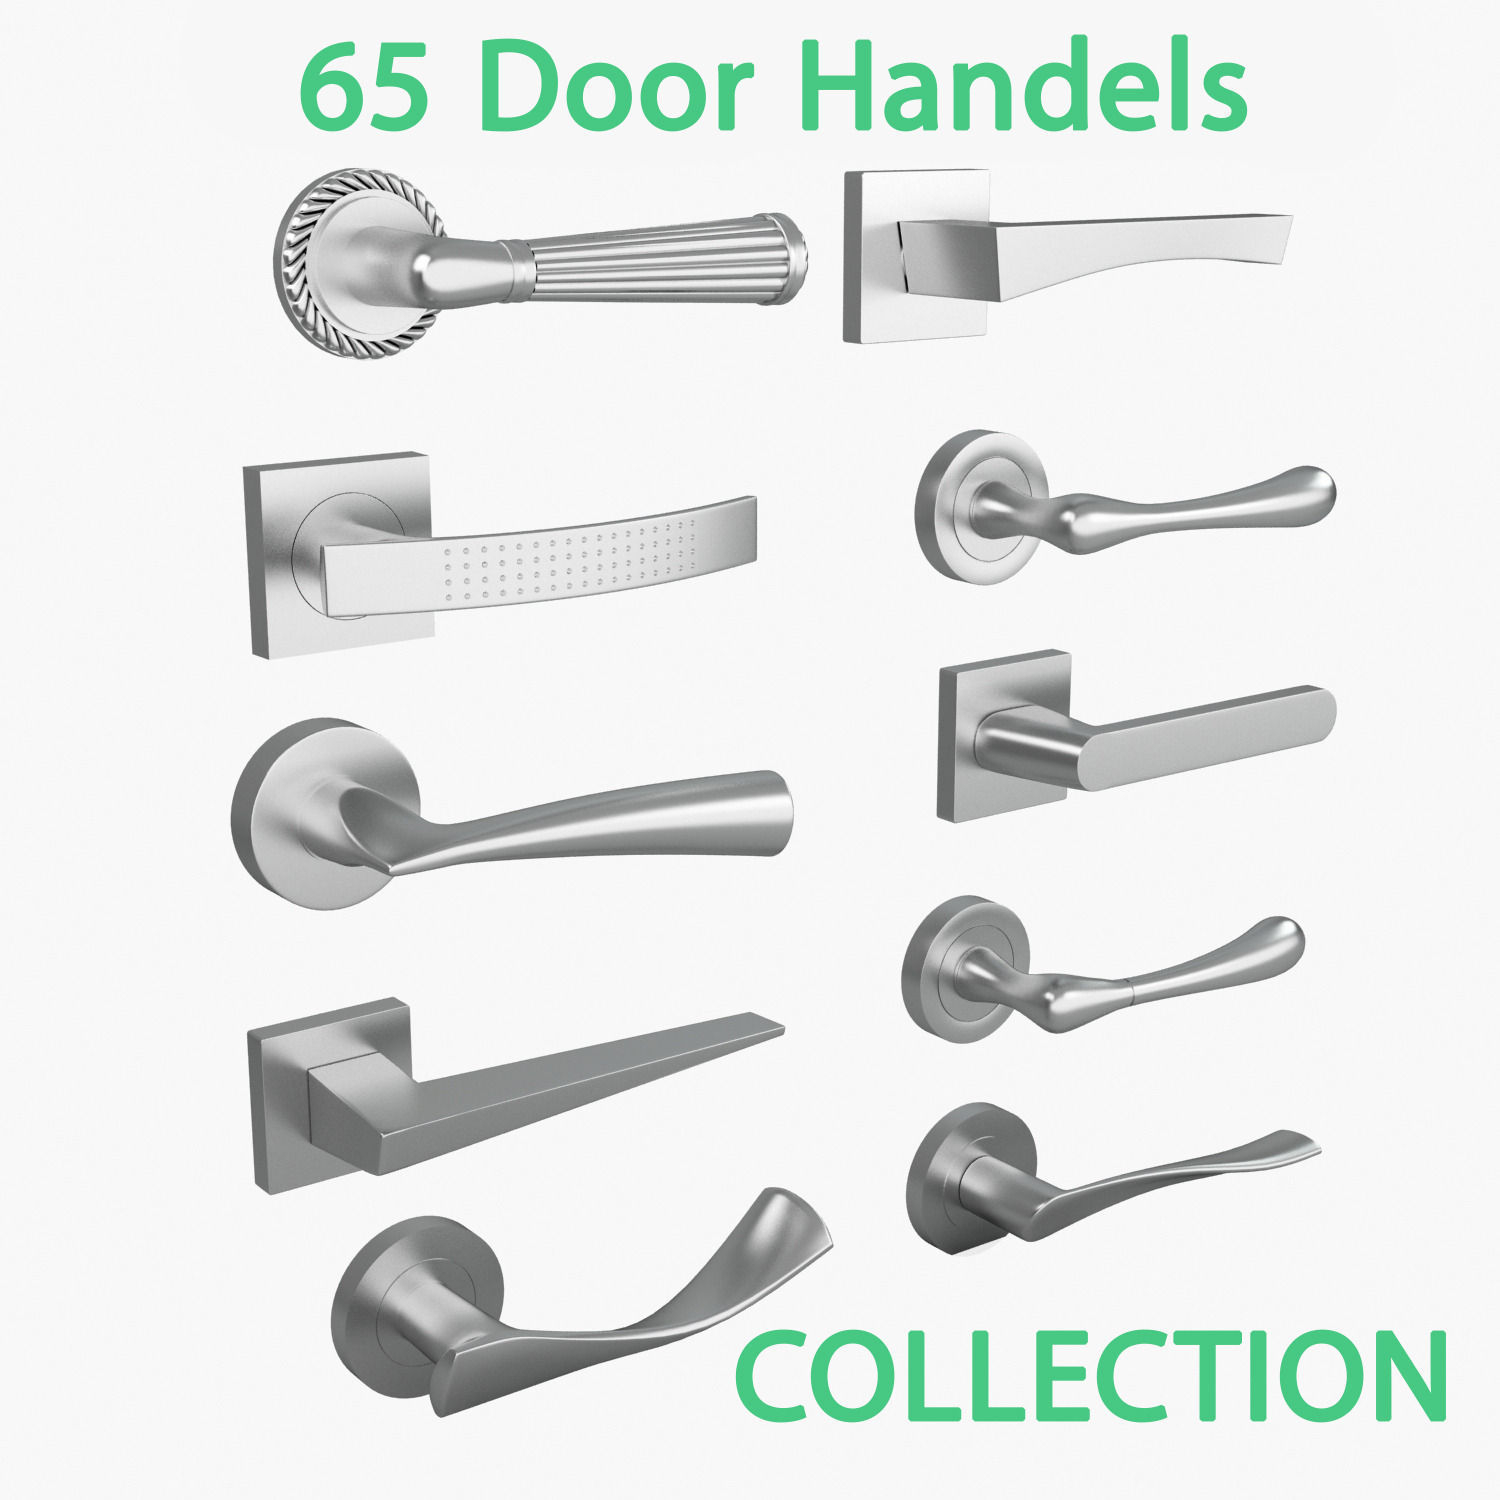 3d 65 Door Handles Collection Cgtrader within dimensions 1500 X 1500